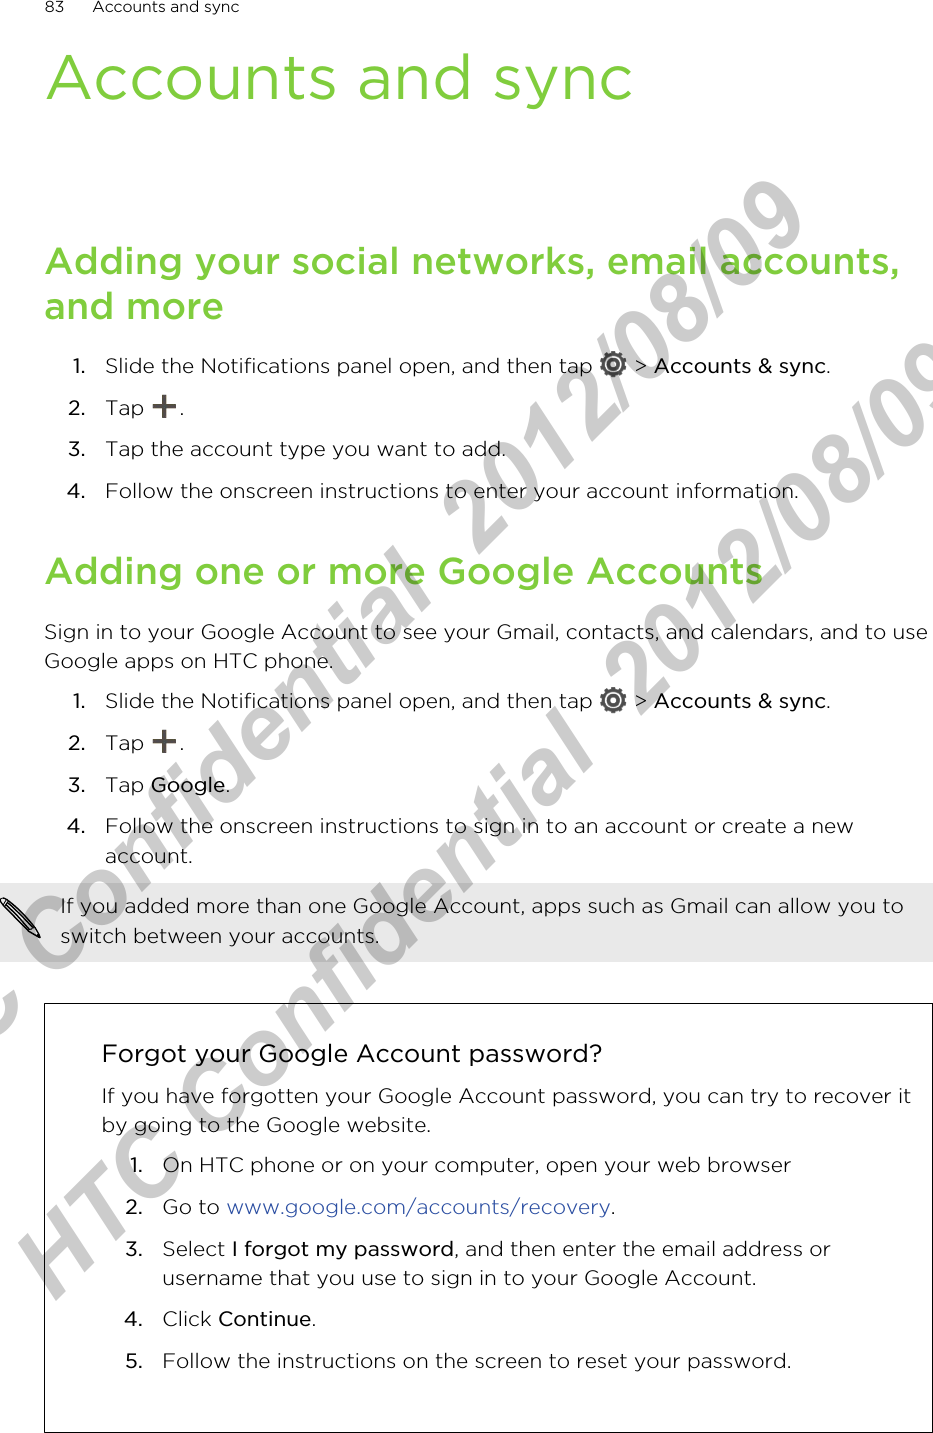 Accounts and syncAdding your social networks, email accounts,and more1. Slide the Notifications panel open, and then tap   &gt; Accounts &amp; sync.2. Tap  .3. Tap the account type you want to add.4. Follow the onscreen instructions to enter your account information.Adding one or more Google AccountsSign in to your Google Account to see your Gmail, contacts, and calendars, and to useGoogle apps on HTC phone.1. Slide the Notifications panel open, and then tap   &gt; Accounts &amp; sync.2. Tap  .3. Tap Google.4. Follow the onscreen instructions to sign in to an account or create a newaccount.If you added more than one Google Account, apps such as Gmail can allow you toswitch between your accounts.Forgot your Google Account password?If you have forgotten your Google Account password, you can try to recover itby going to the Google website.1. On HTC phone or on your computer, open your web browser2. Go to www.google.com/accounts/recovery.3. Select I forgot my password, and then enter the email address orusername that you use to sign in to your Google Account.4. Click Continue.5. Follow the instructions on the screen to reset your password.83 Accounts and syncHTC Confidential  2012/08/09  HTC Confidential  2012/08/09 